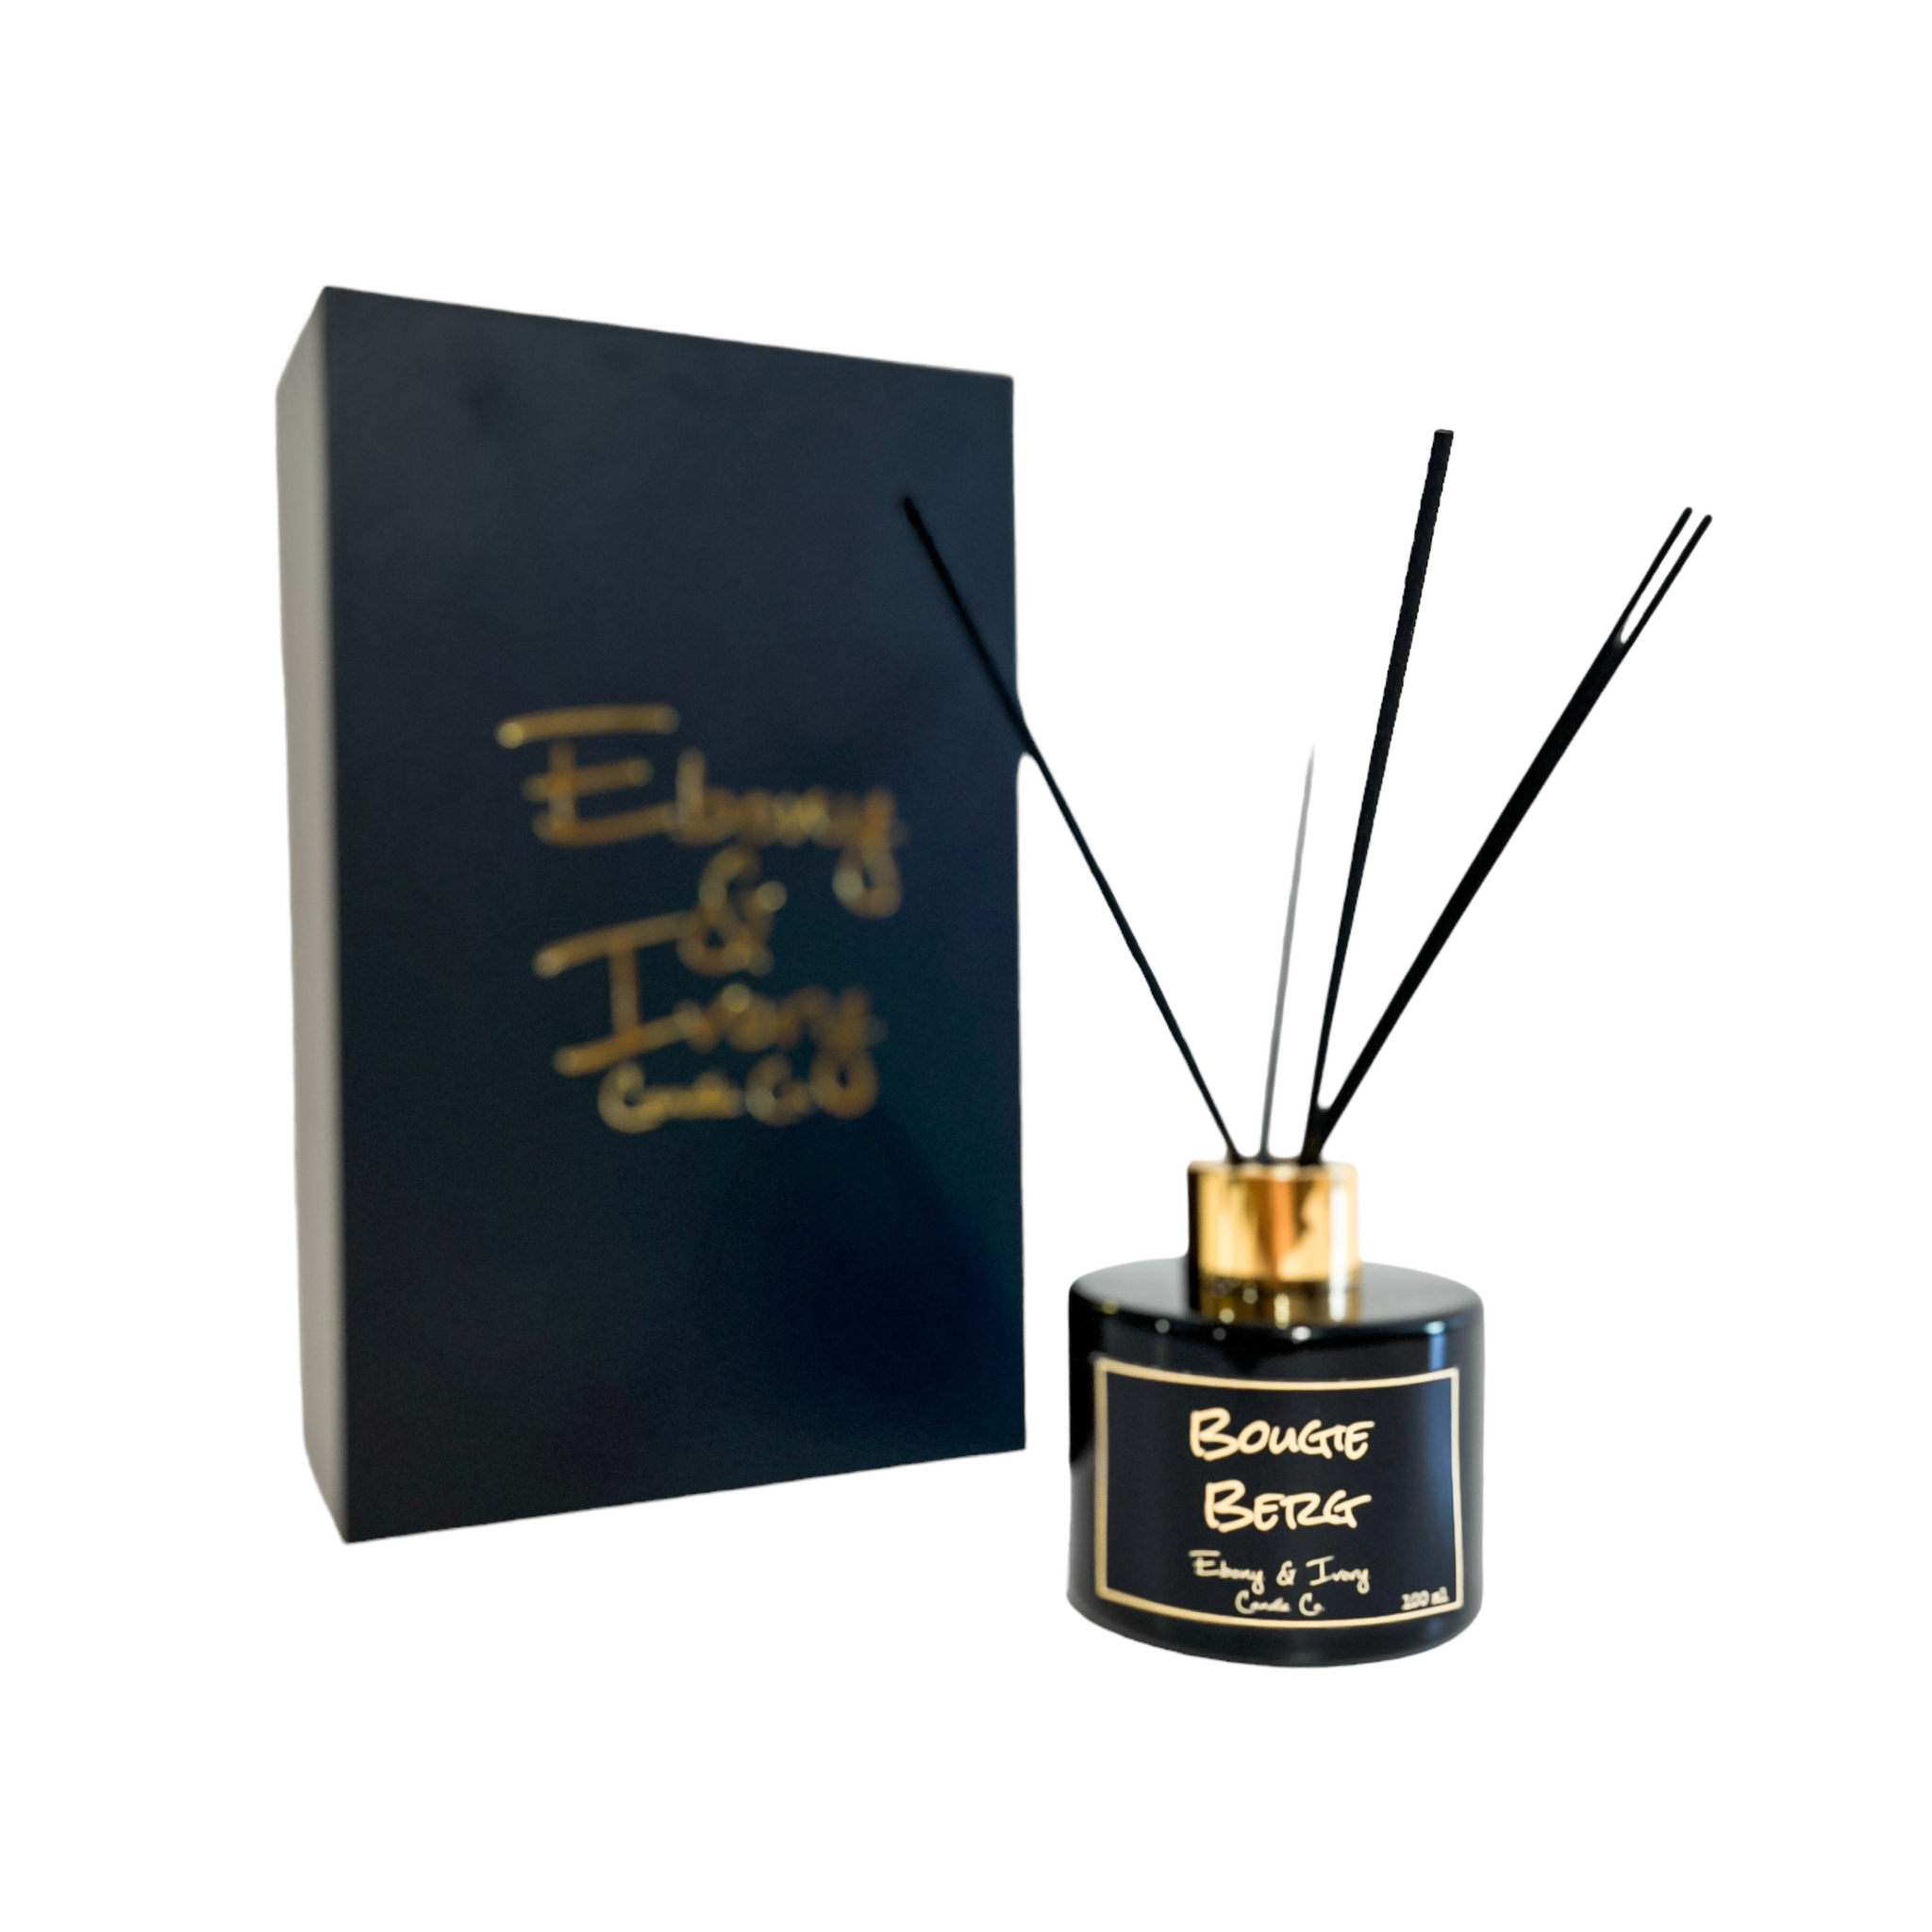 Black, one hundred milliliters, bergamot, sugared citrus, and sandalwood scented reed diffuser with a gold lid and a black label that reads Bougie Berg